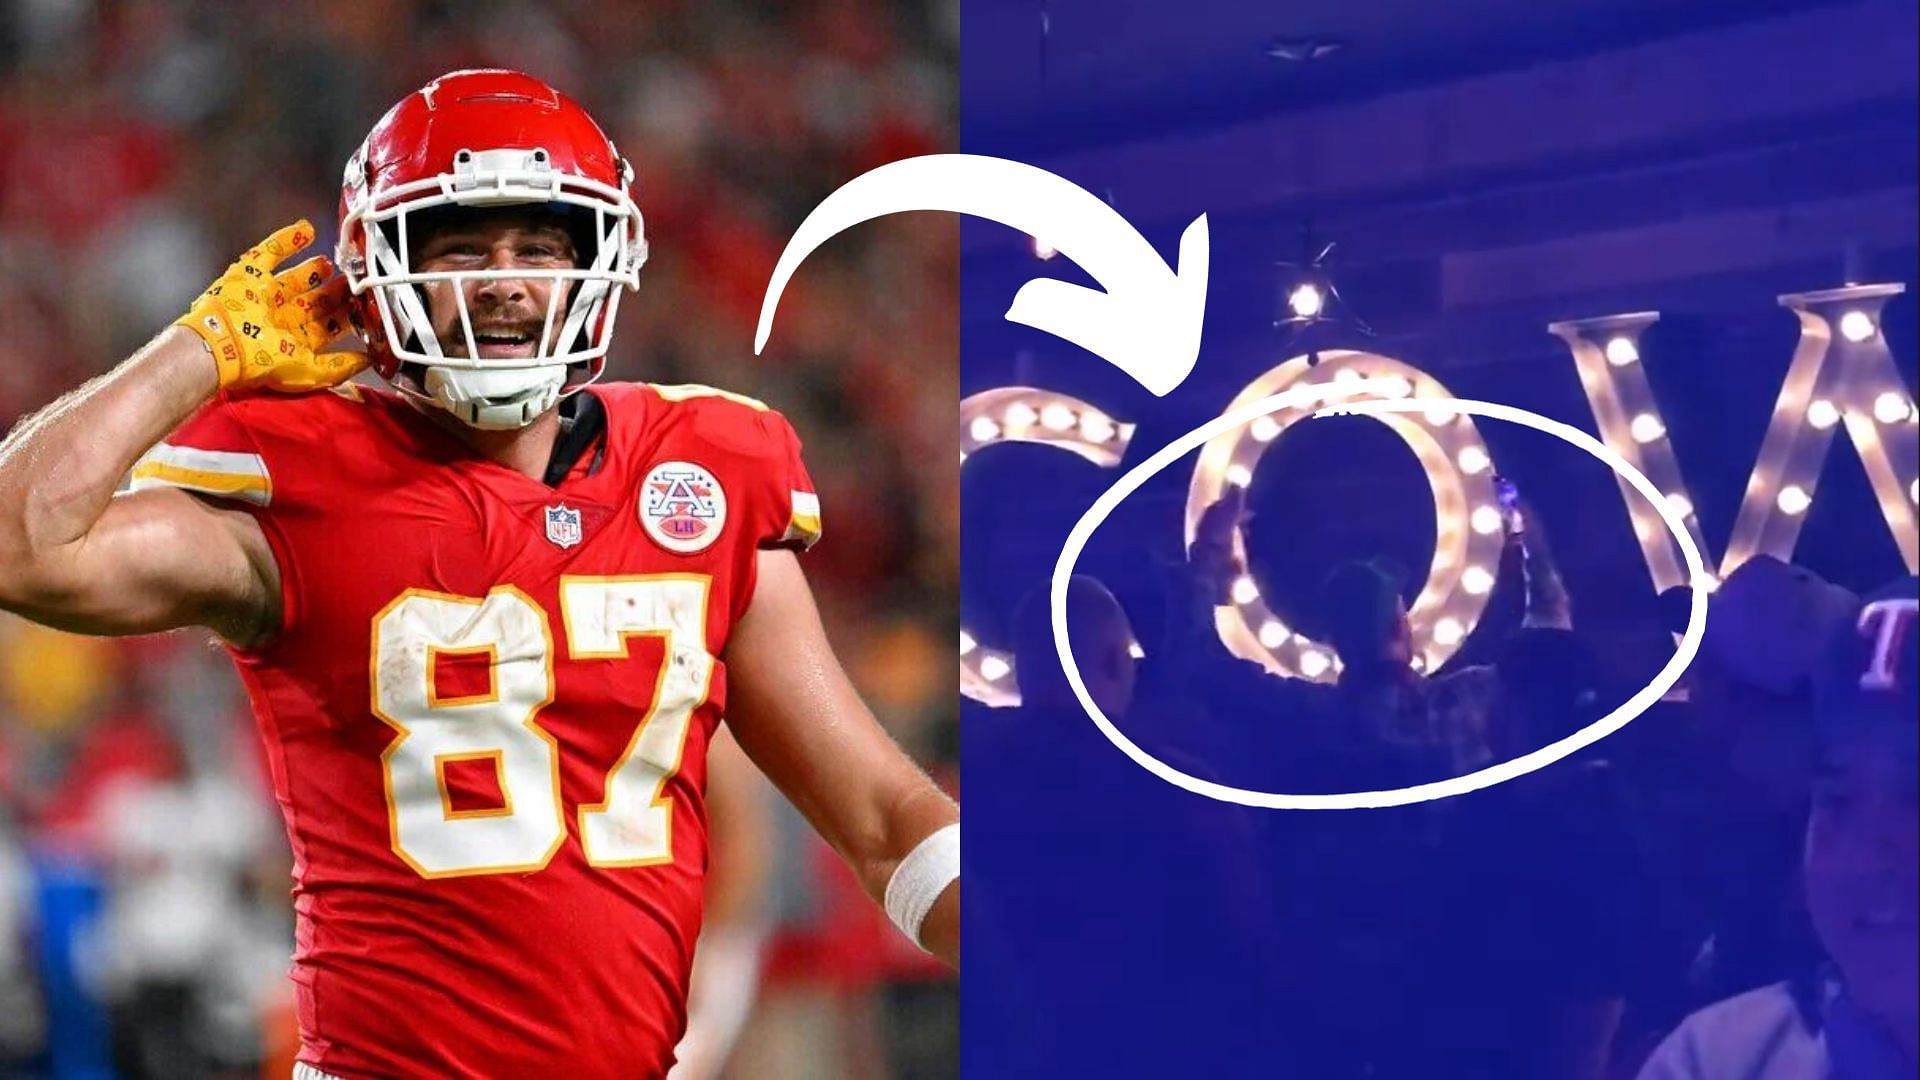 Travis Kelce enjoys himself to a Taylor Swift song.